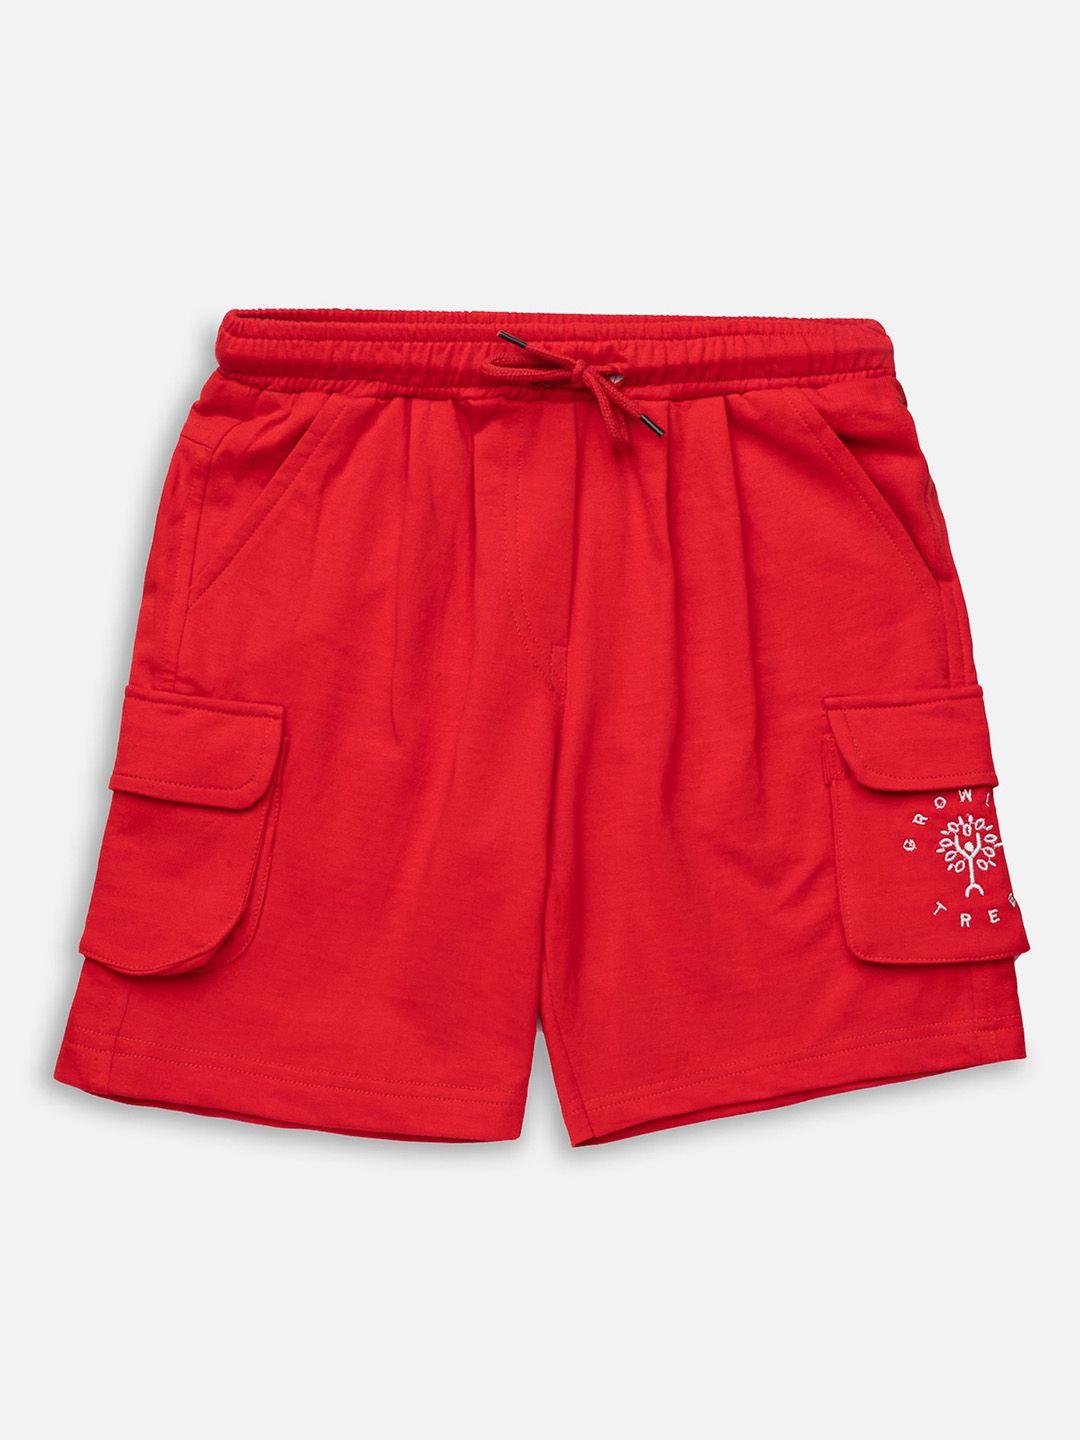 growing tree unisex kids red outdoor antimicrobial technology shorts